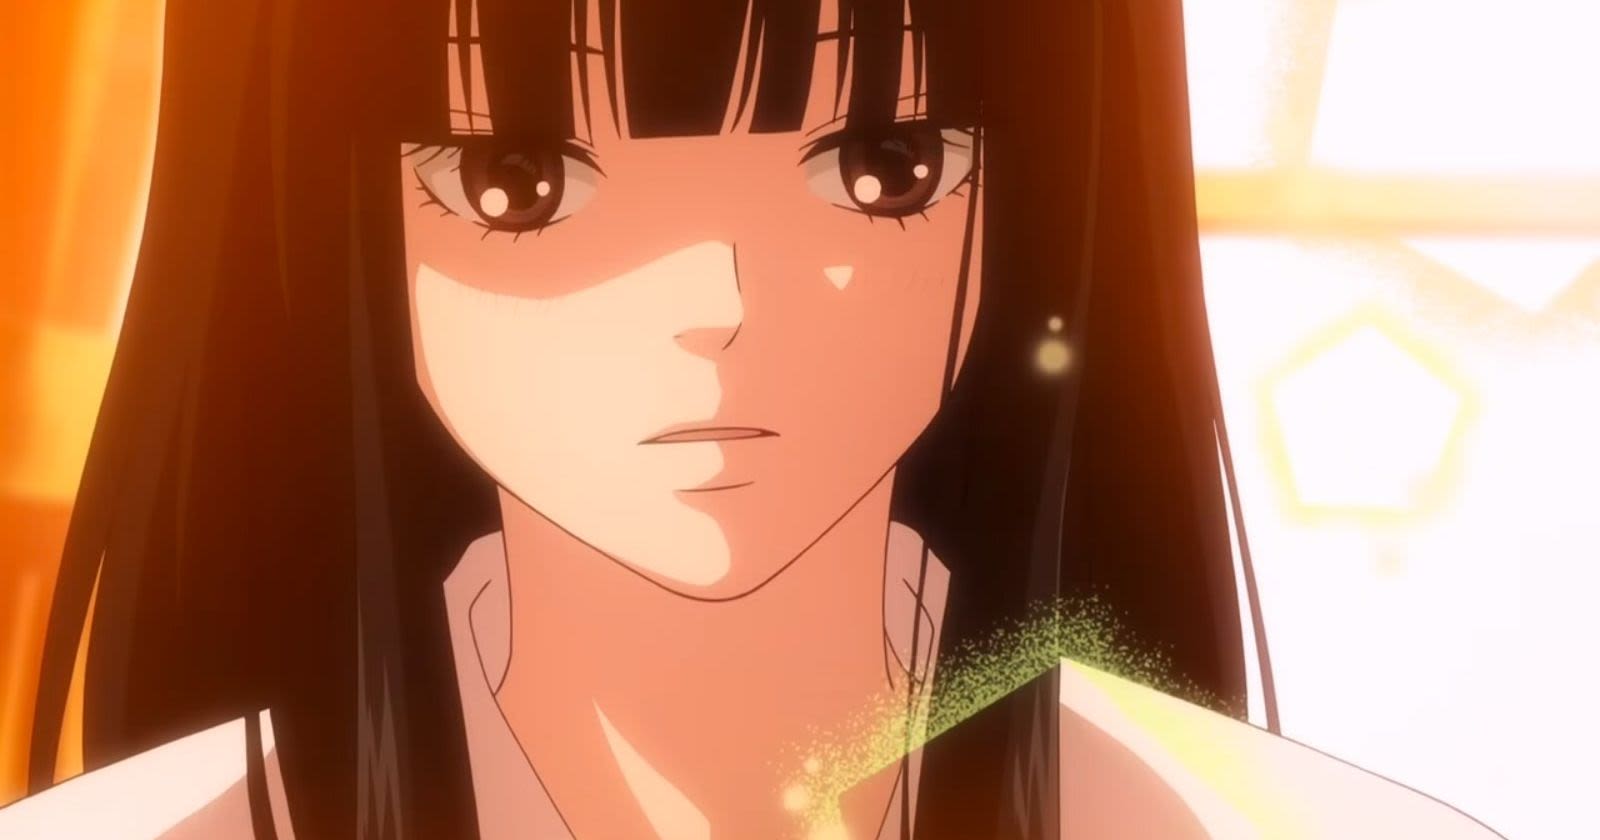 Who Ends up Together in Kimi ni Todoke? Manga Ending Explained